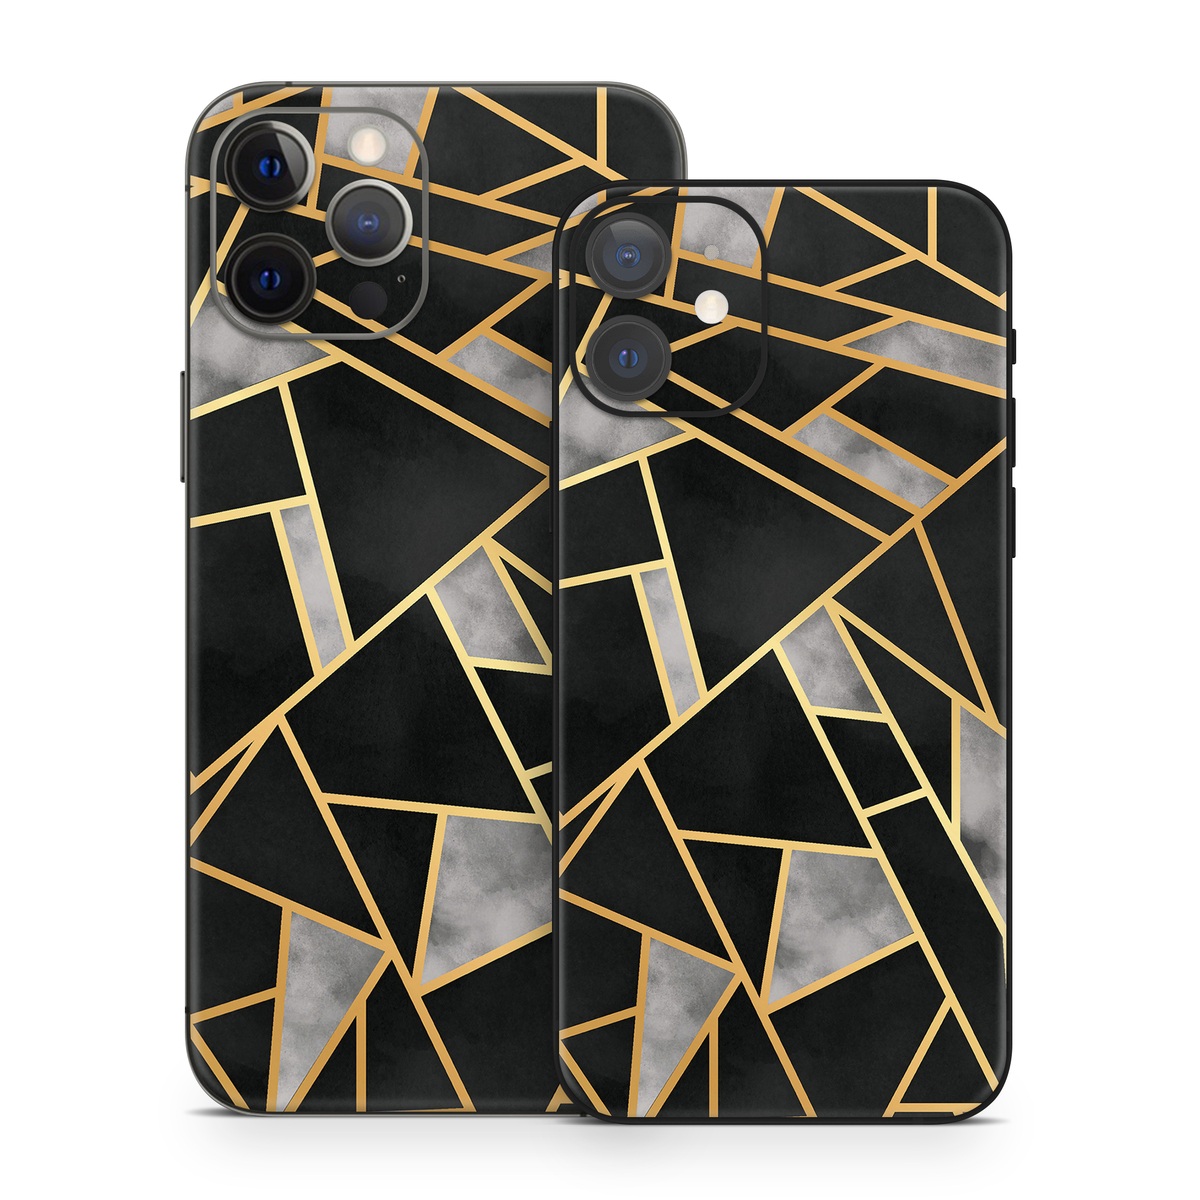 iPhone 12 Series Skin design of Pattern, Triangle, Yellow, Line, Tile, Floor, Design, Symmetry, Architecture, Flooring, with black, gray, yellow colors